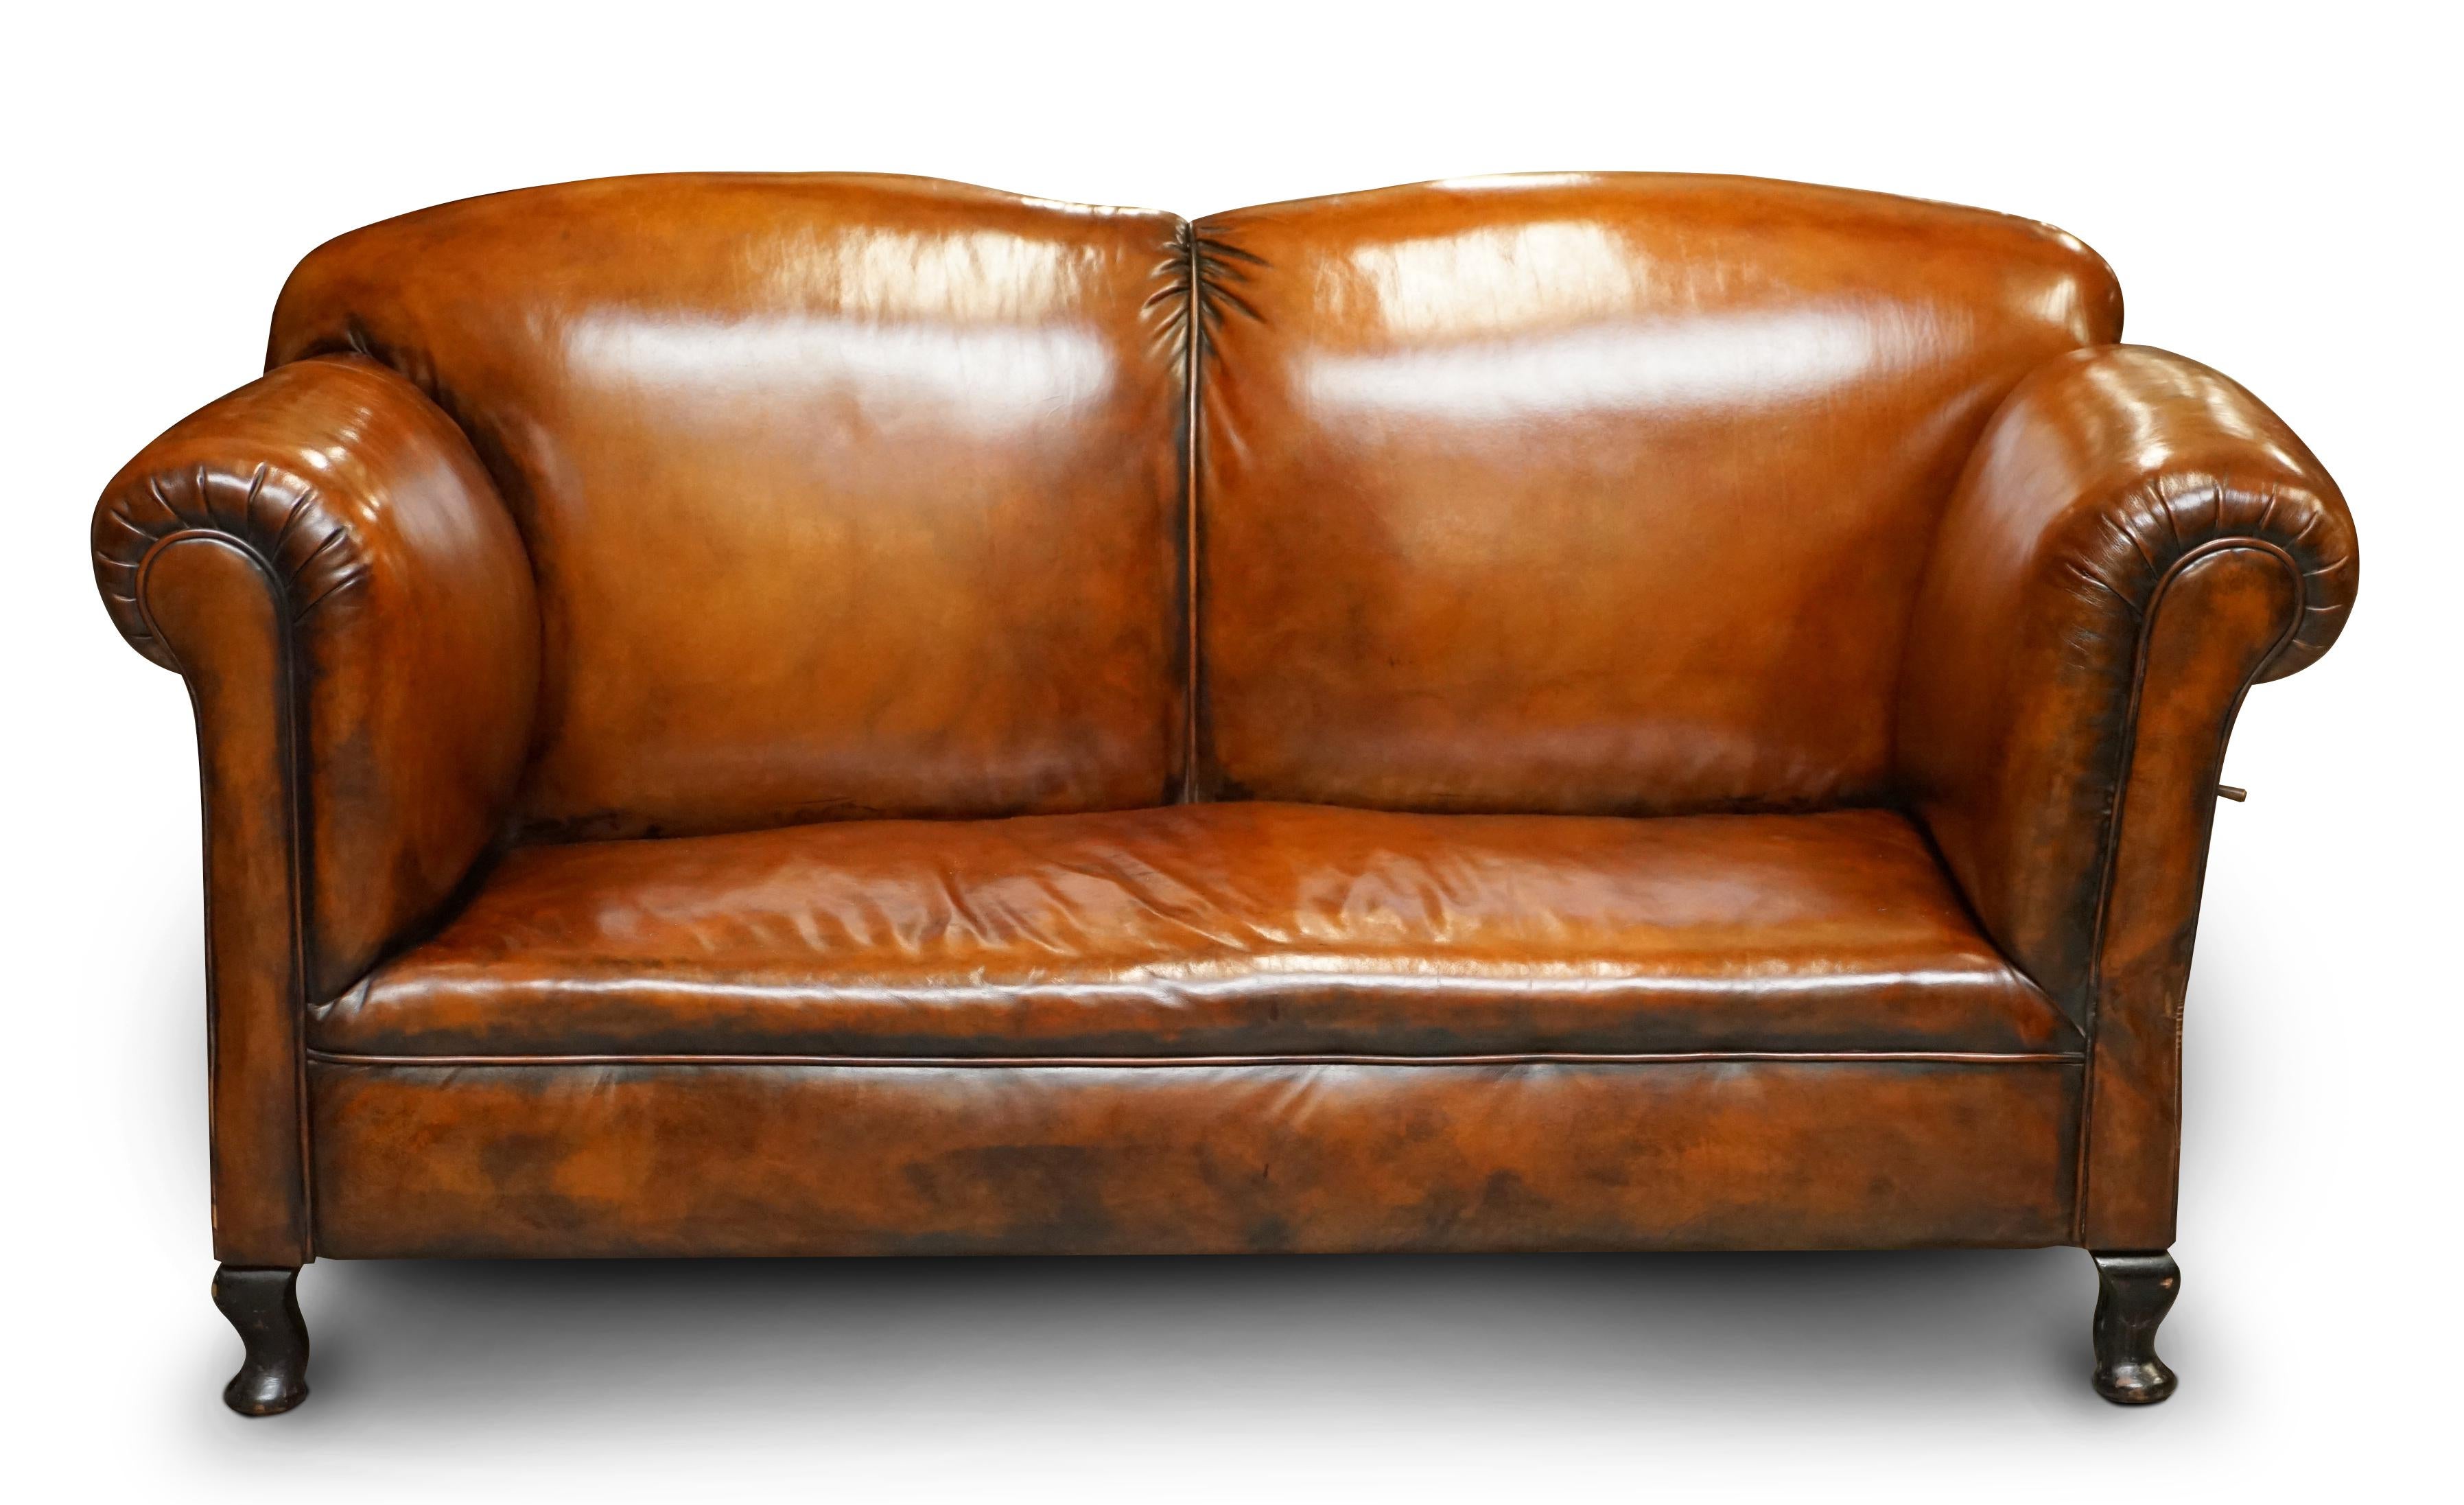 We are delighted to offer for sale this stunning fully restored Victorian drop arm sofa chaise lounge in hand dyed Whisky brown leather

A very good looking well made and comfortable sofa chaise. The seat platform is coil sprung with the original